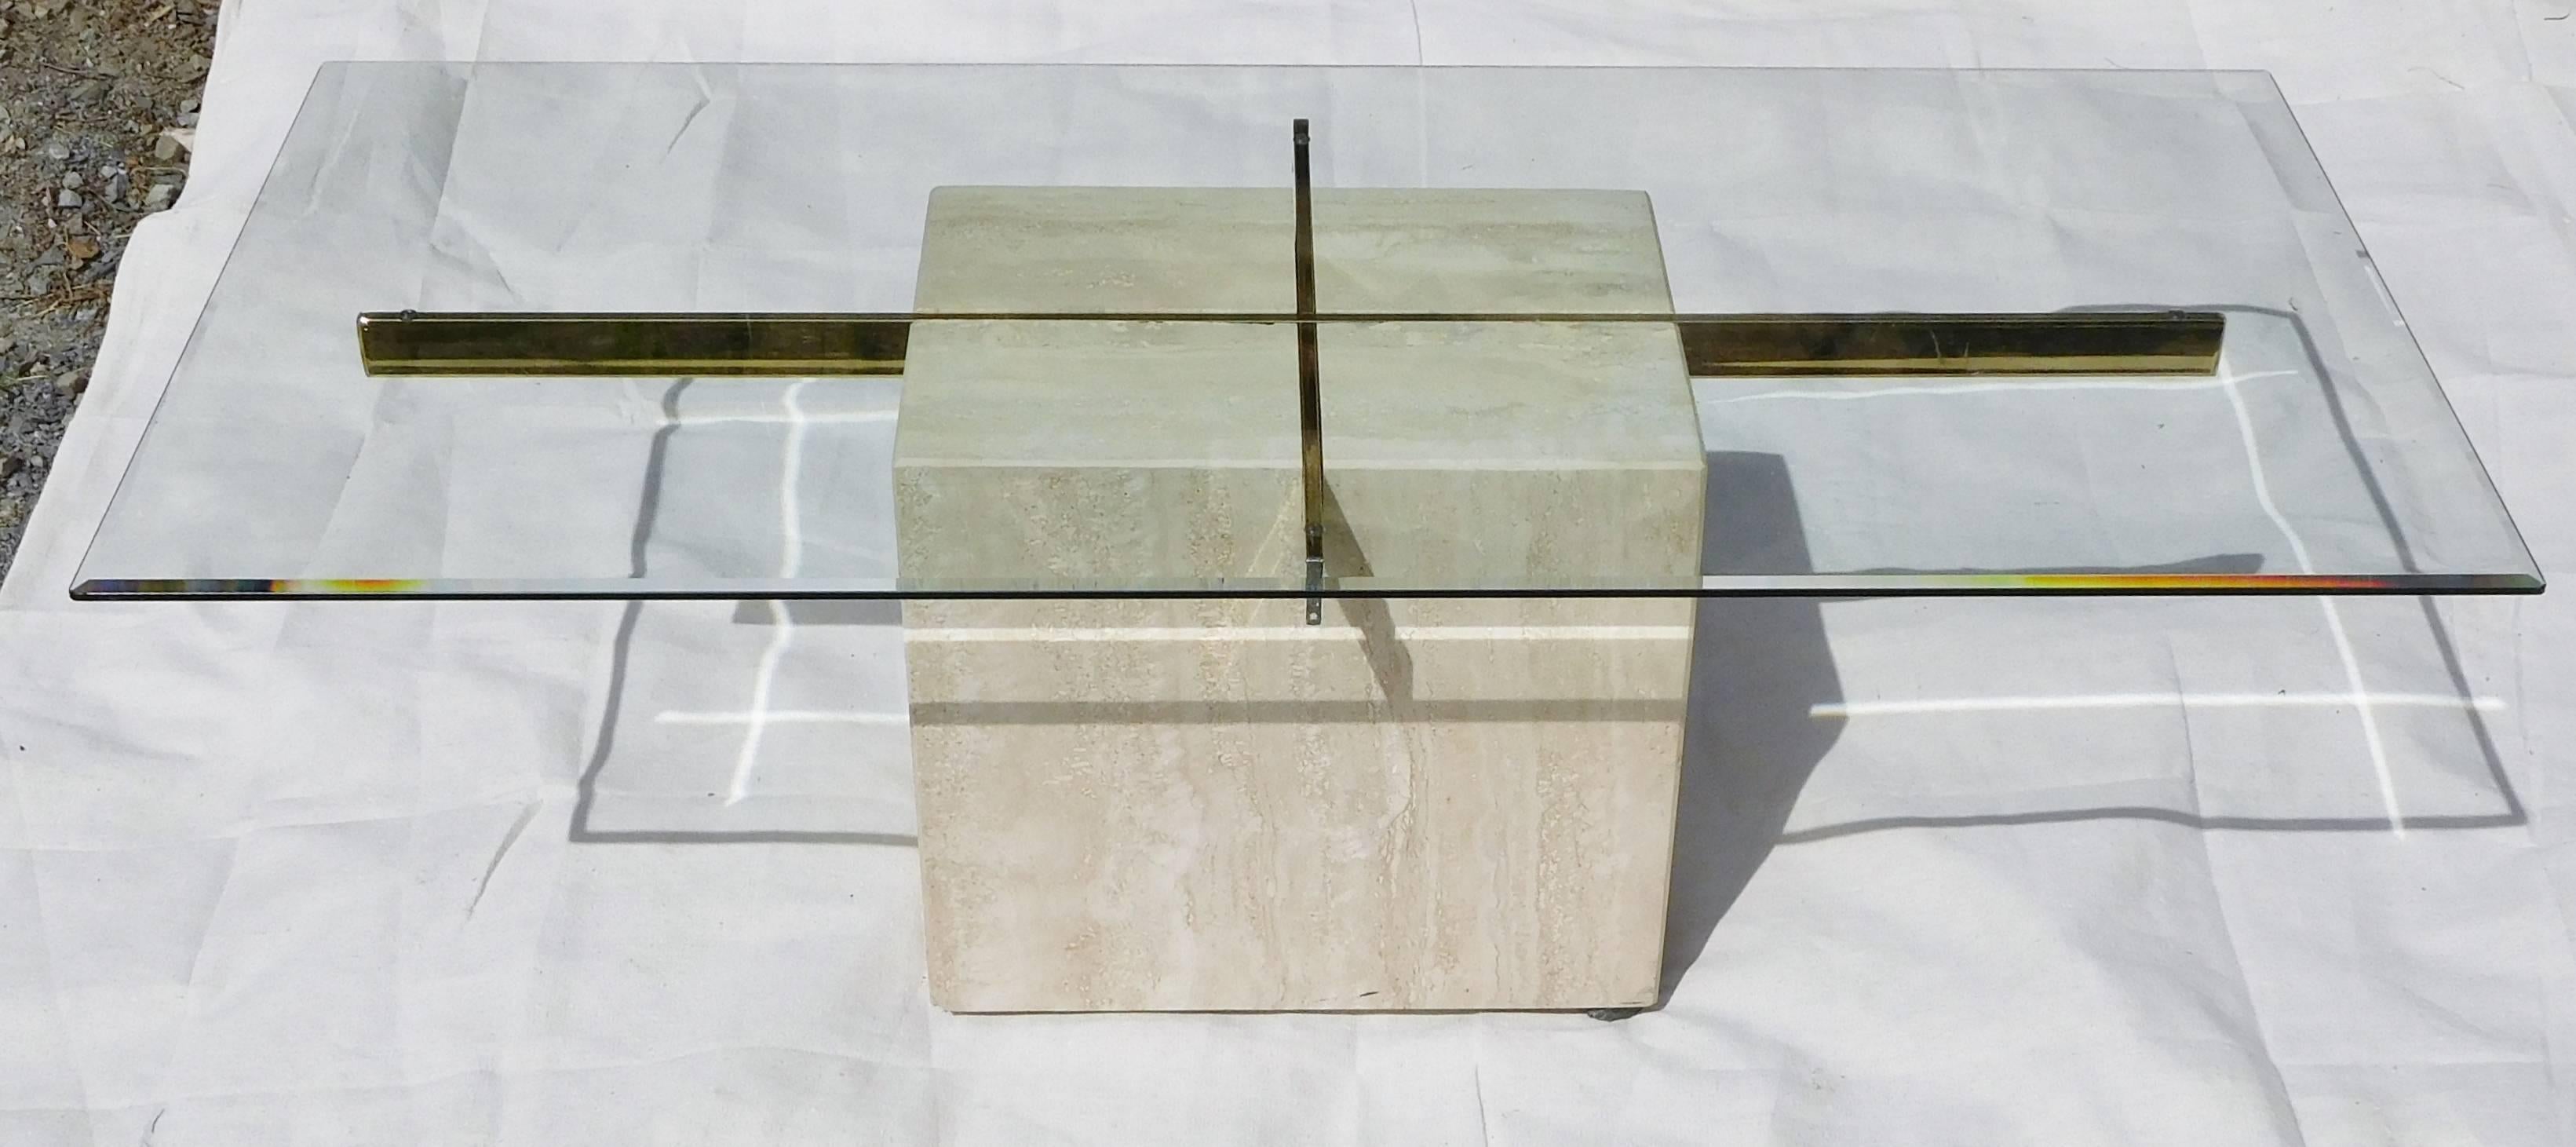 This iconic Italian-made coffee table designed by Artedi of the United Kingdom, has a beveled glass panel sitting on a polished brass cross which is embedded in a Travertine cube. Underneath, the table is marked in blue stencil: Made in